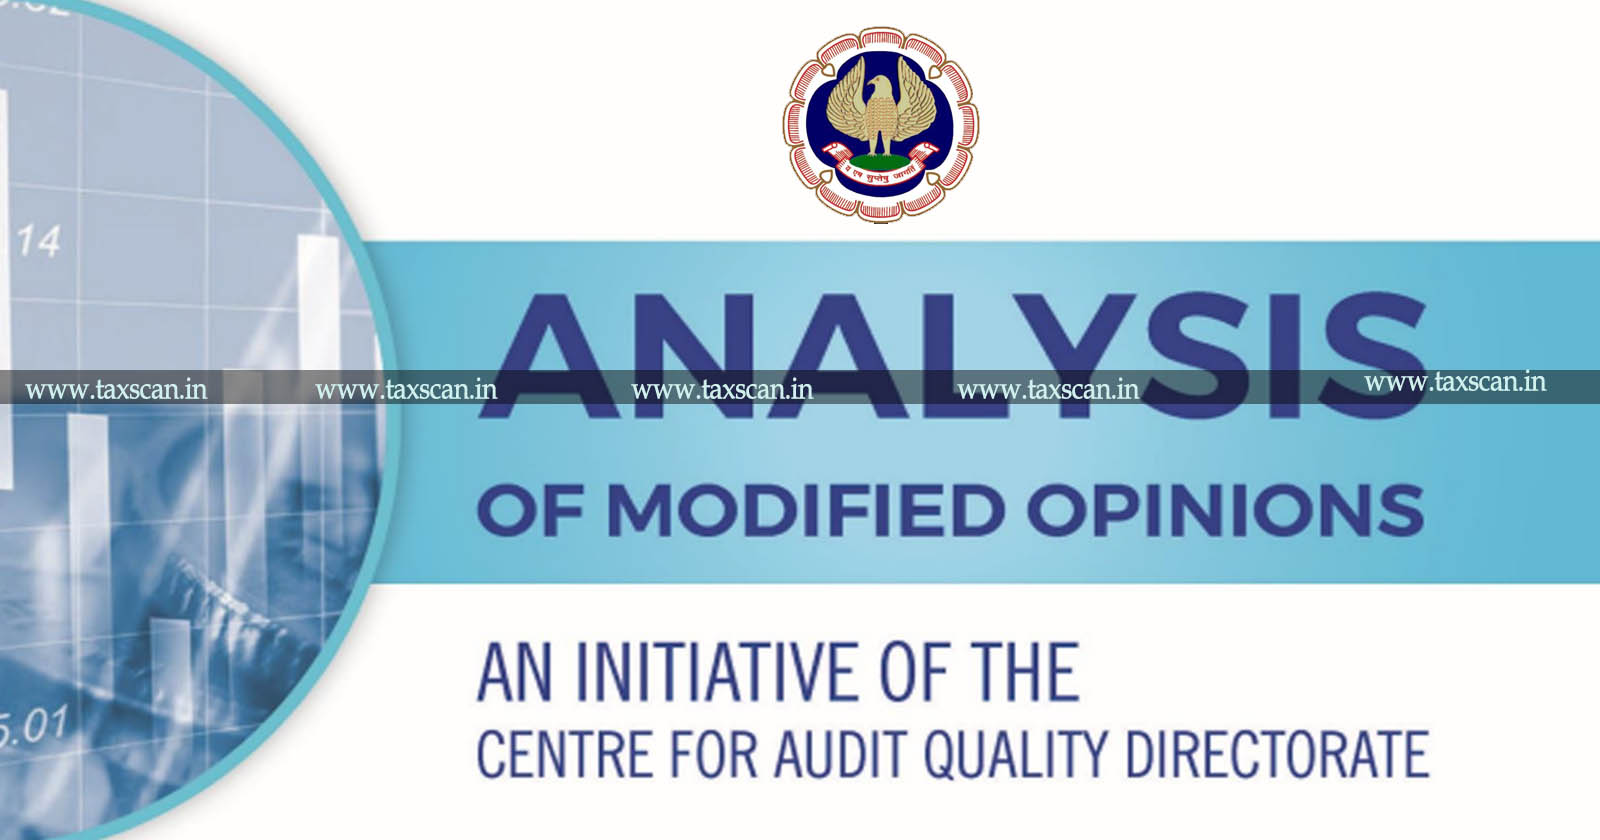 ICAI releases Ready Reference of - Different Industries For easy Audit - the Analysis of Modified Opinions - TAXSCAN